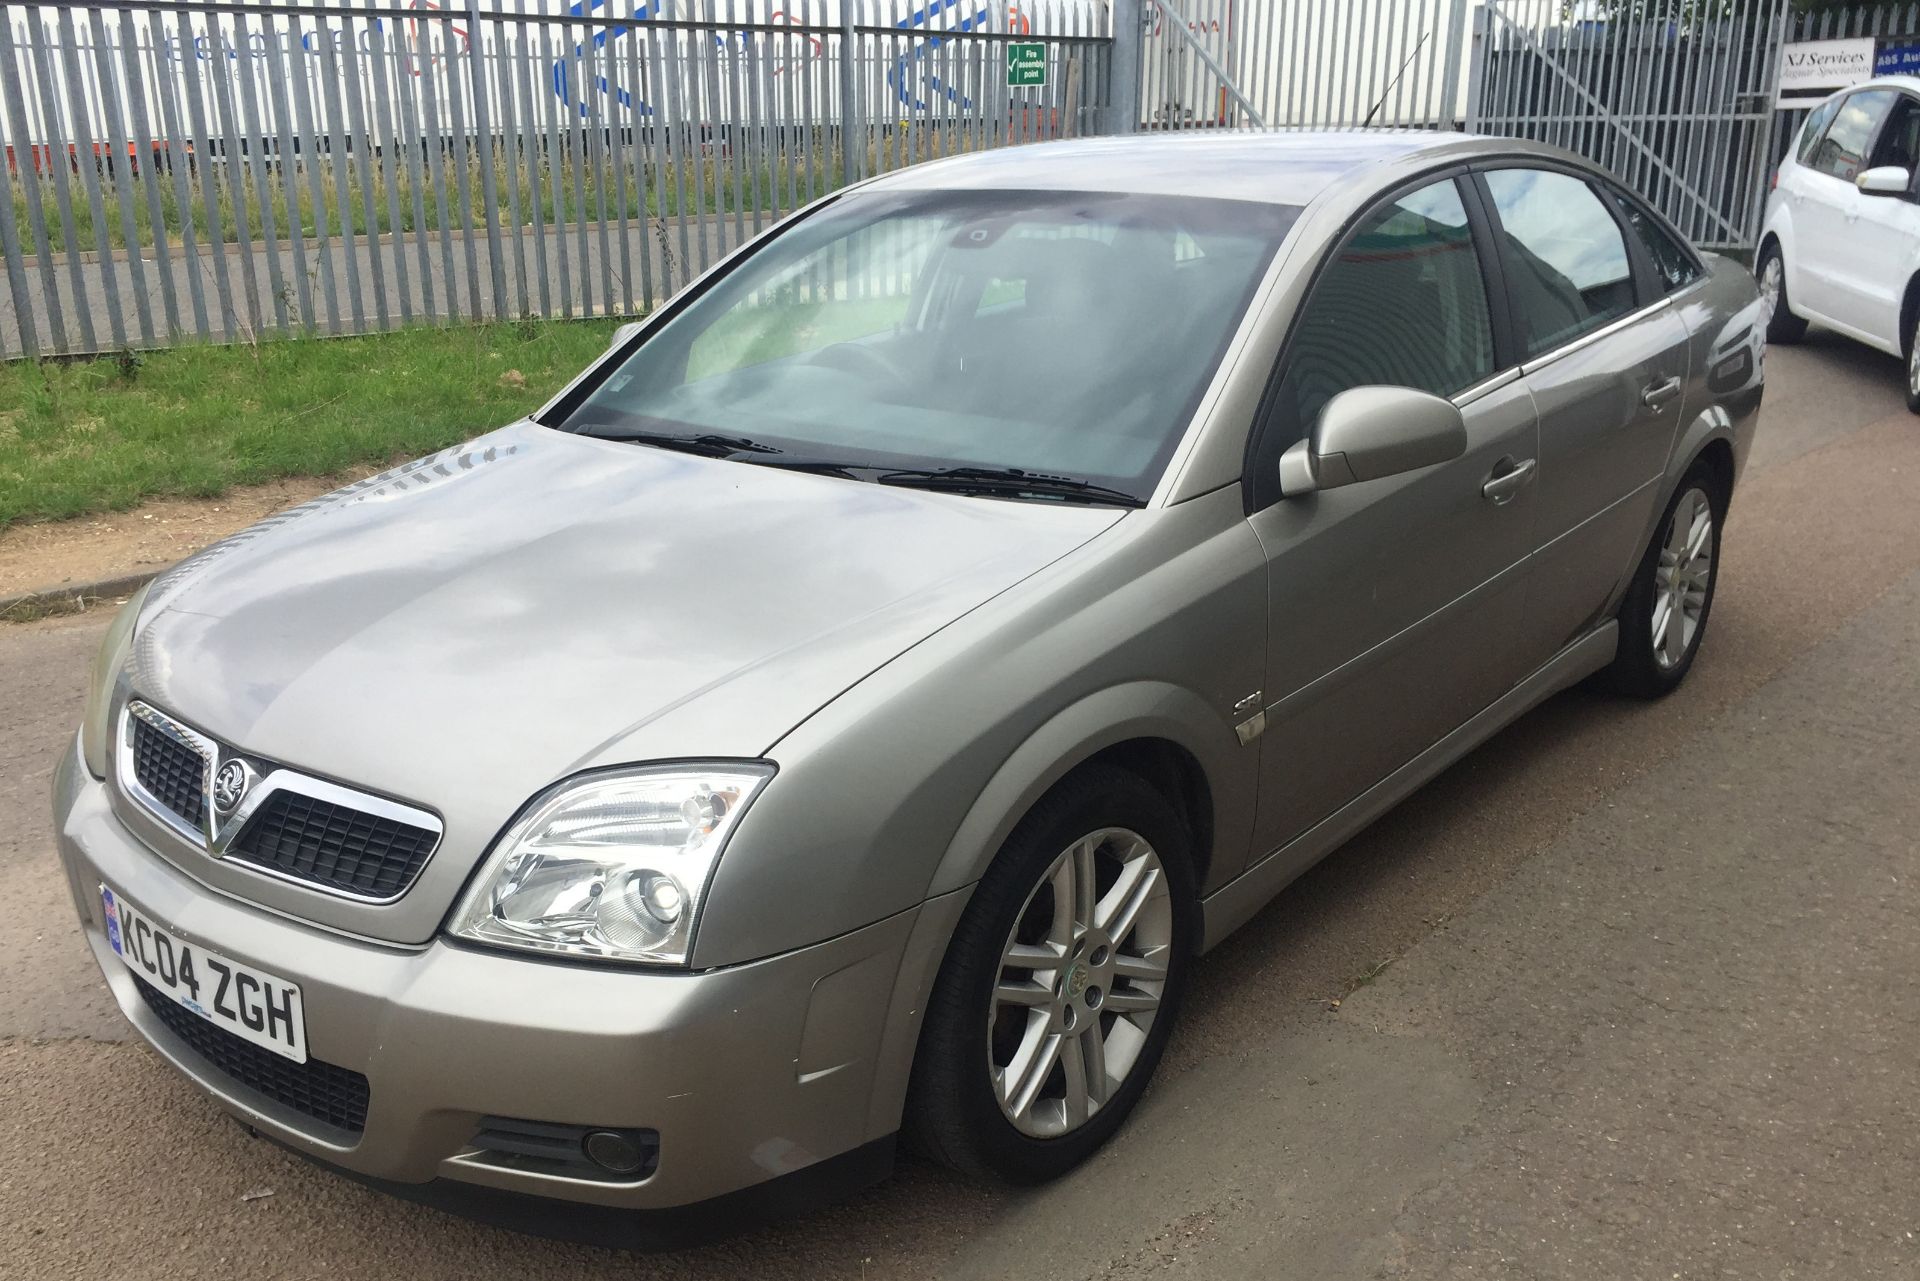 2004 Vauxhall Vectra 2.2 Sri Automatic 4 Dr Saloon - CL505 - NO VAT ON THE HAMMER - Location: Corby, - Image 7 of 7